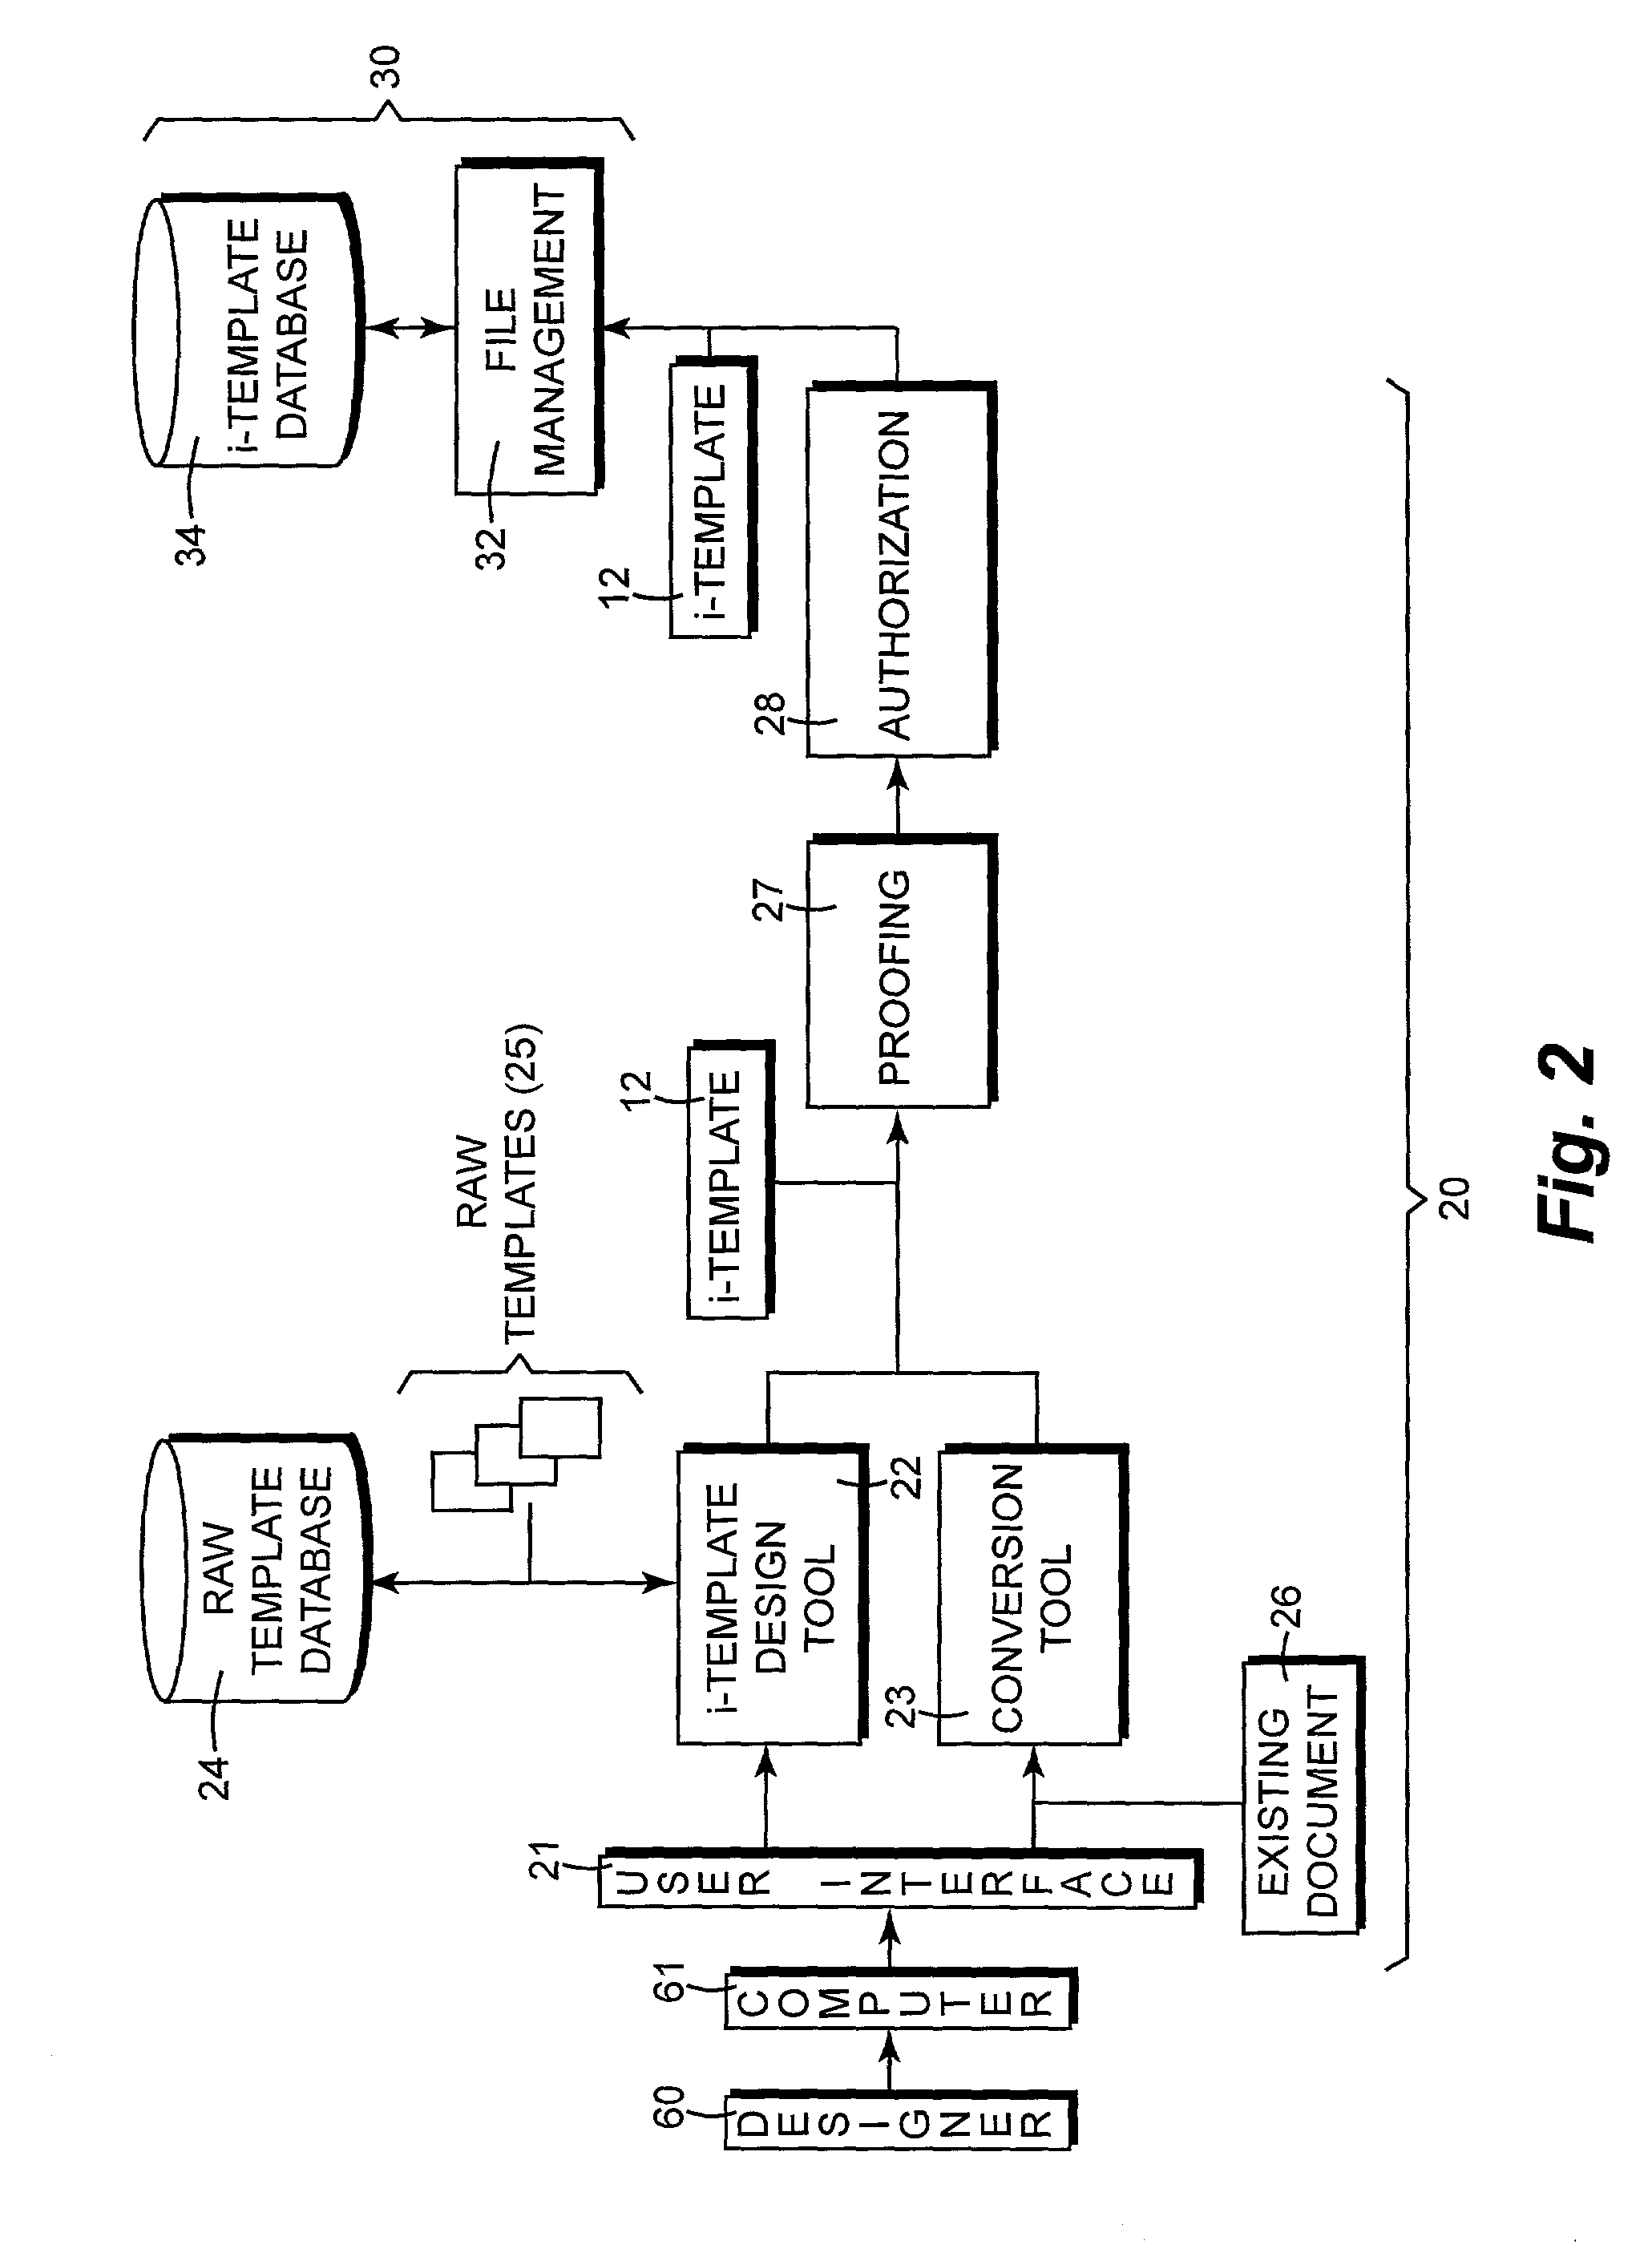 Point-of-need document production system and method